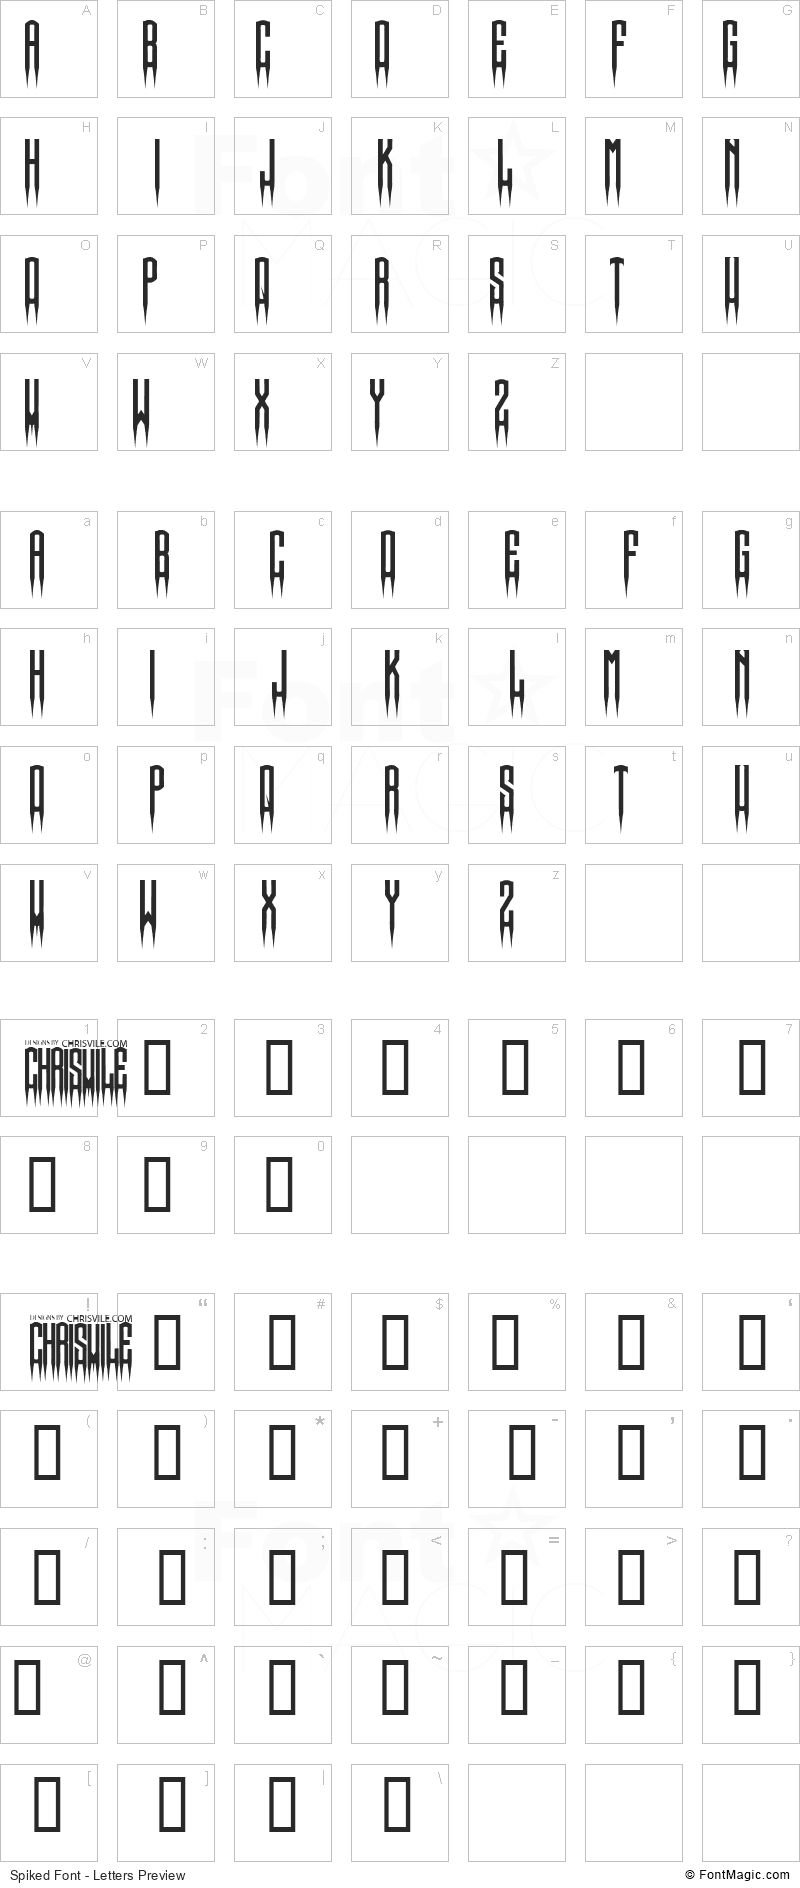 Spiked Font - All Latters Preview Chart